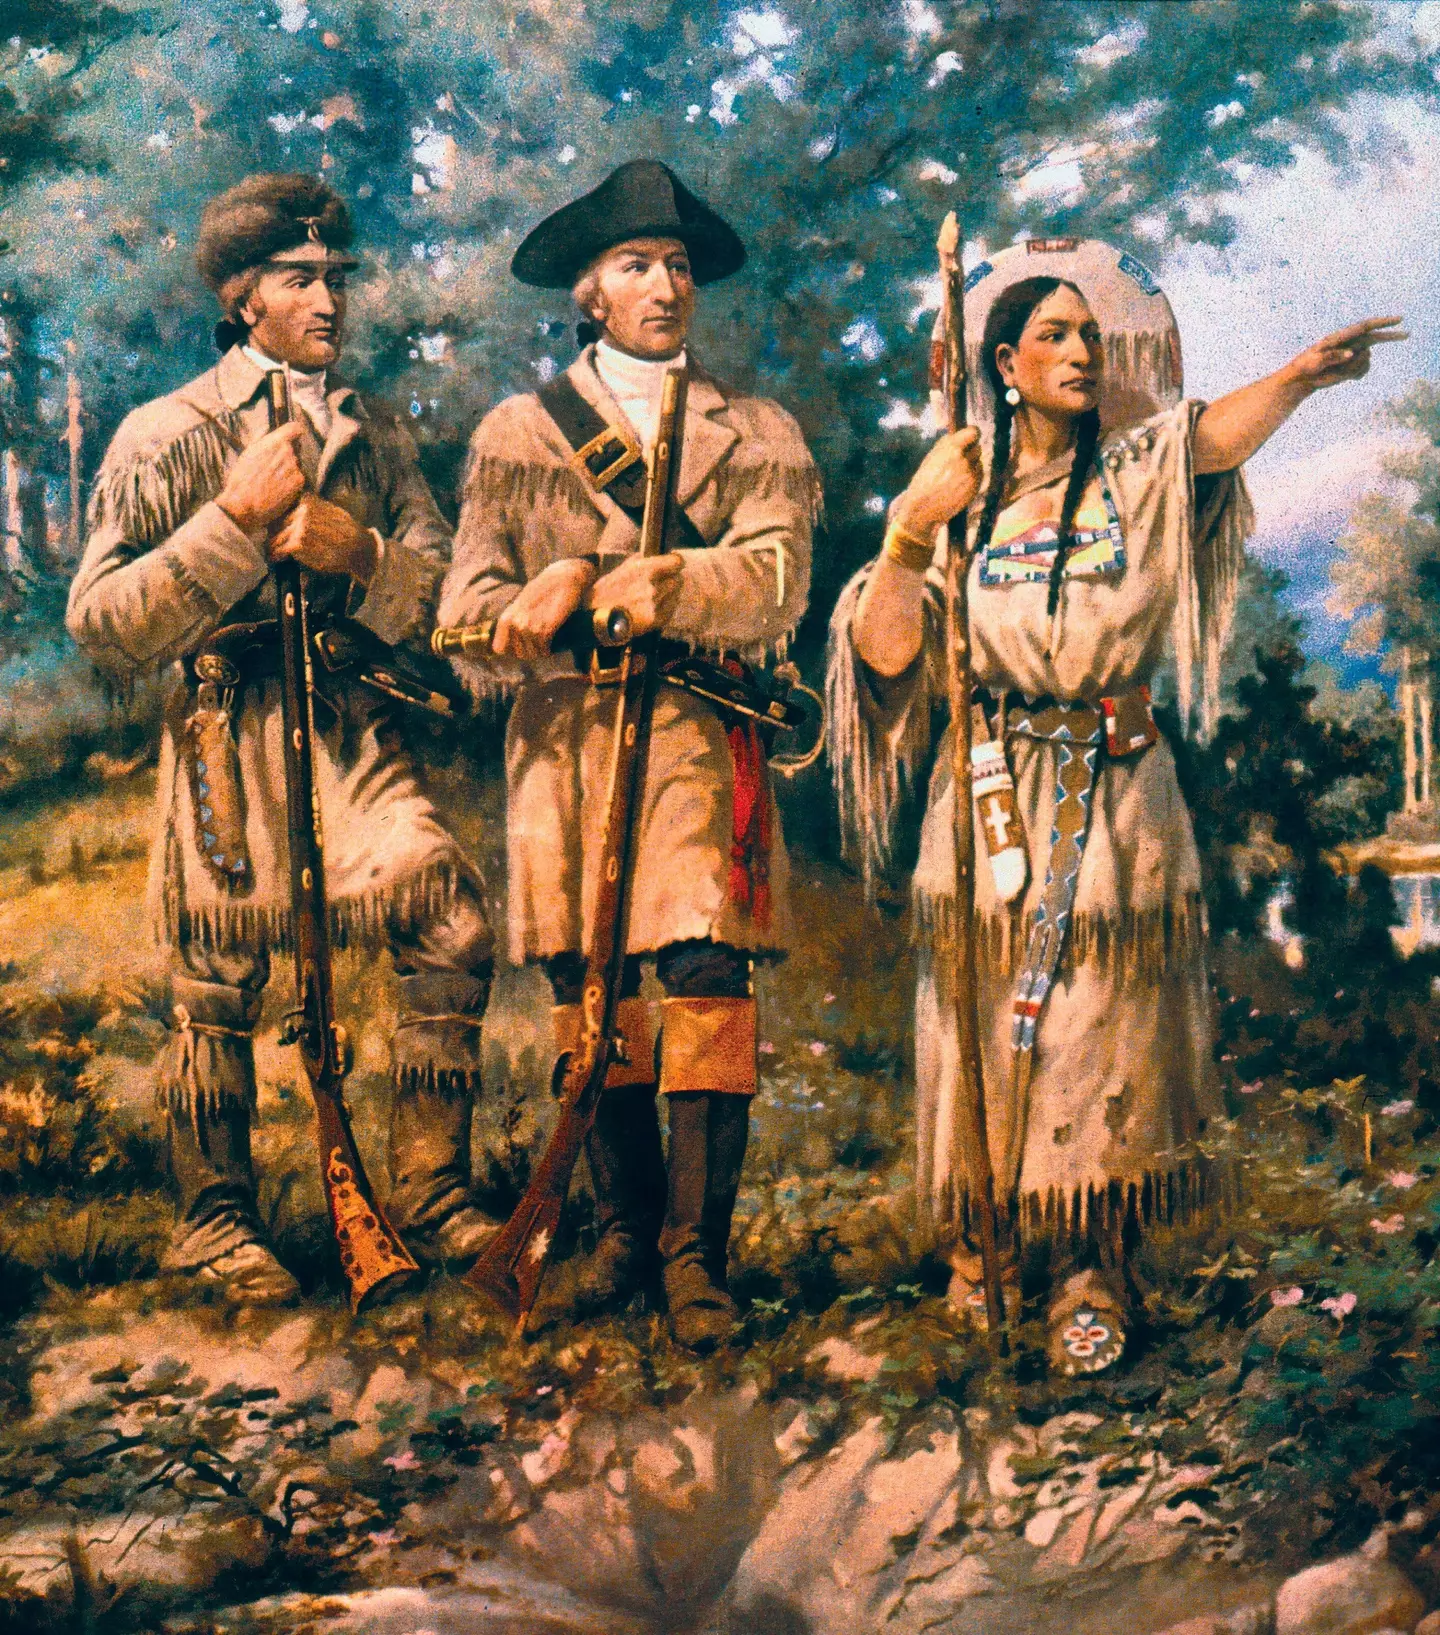 Sacagawea (right) with Lewis and Clark at the Three Forks.